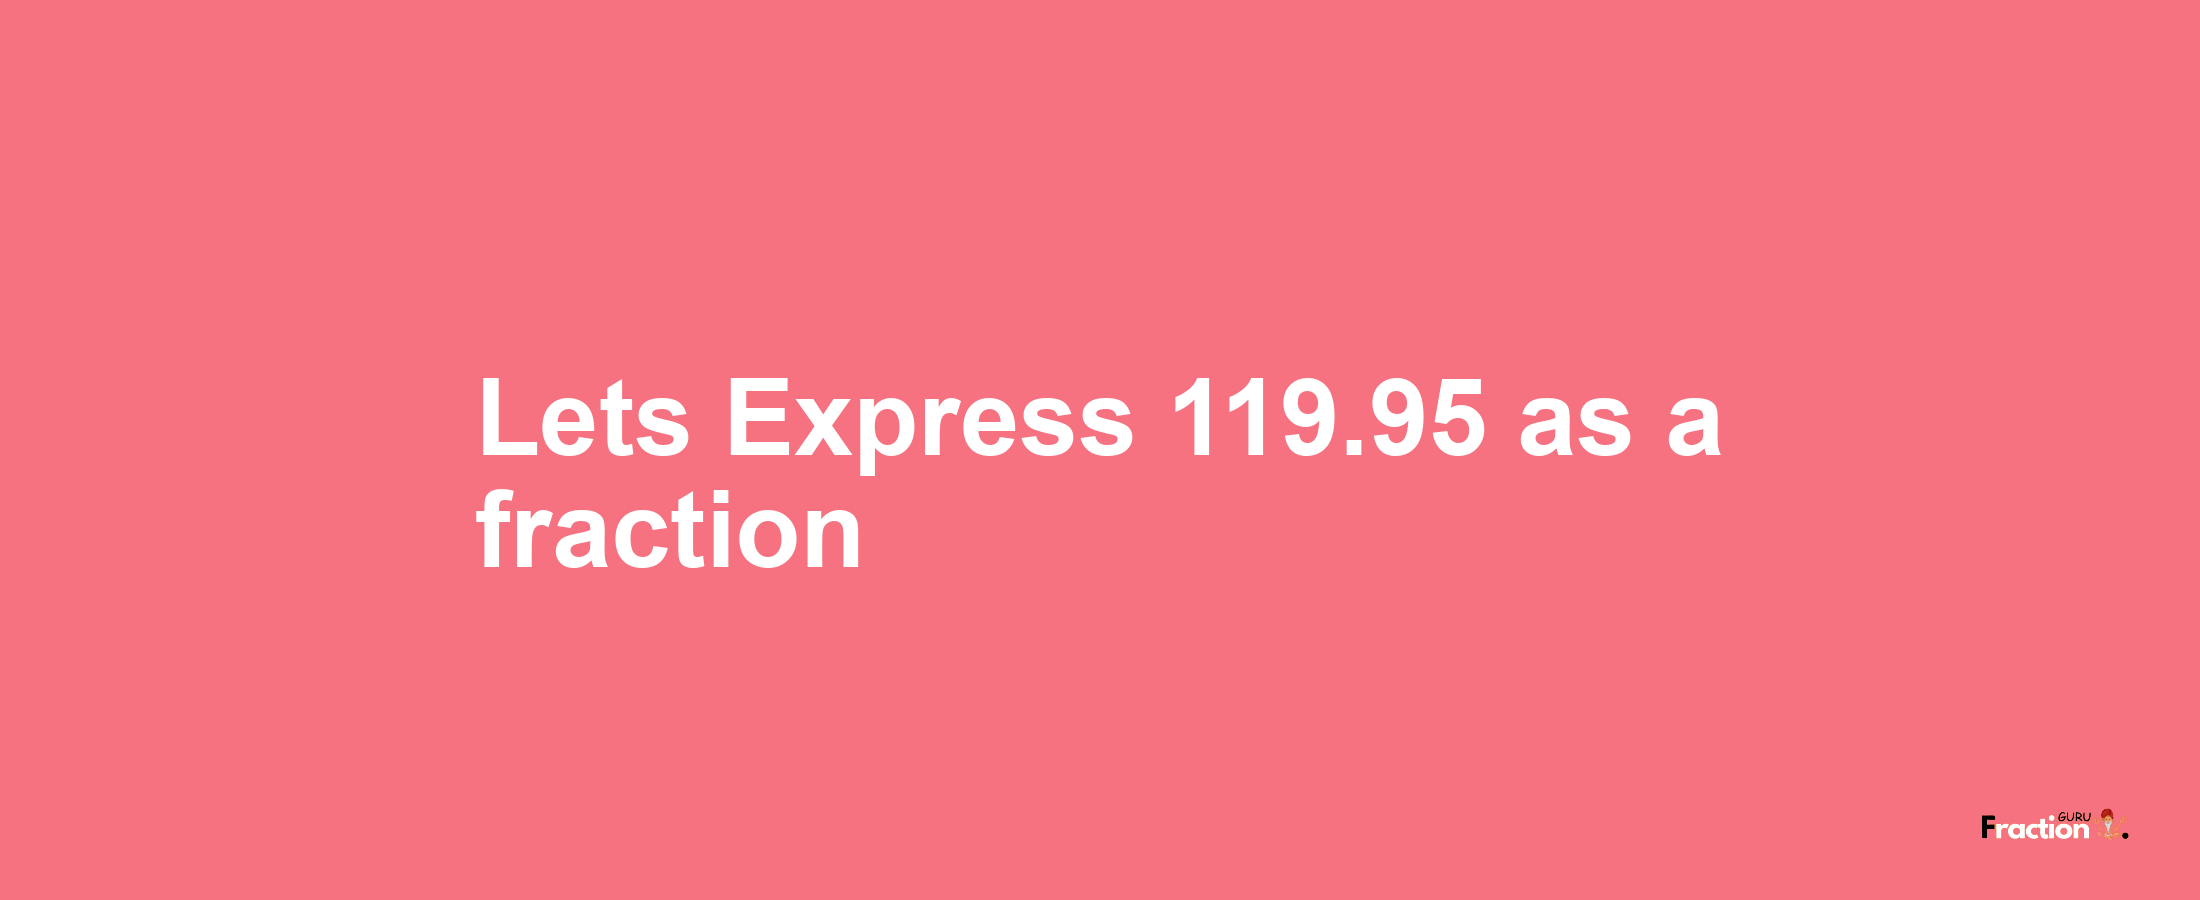 Lets Express 119.95 as afraction